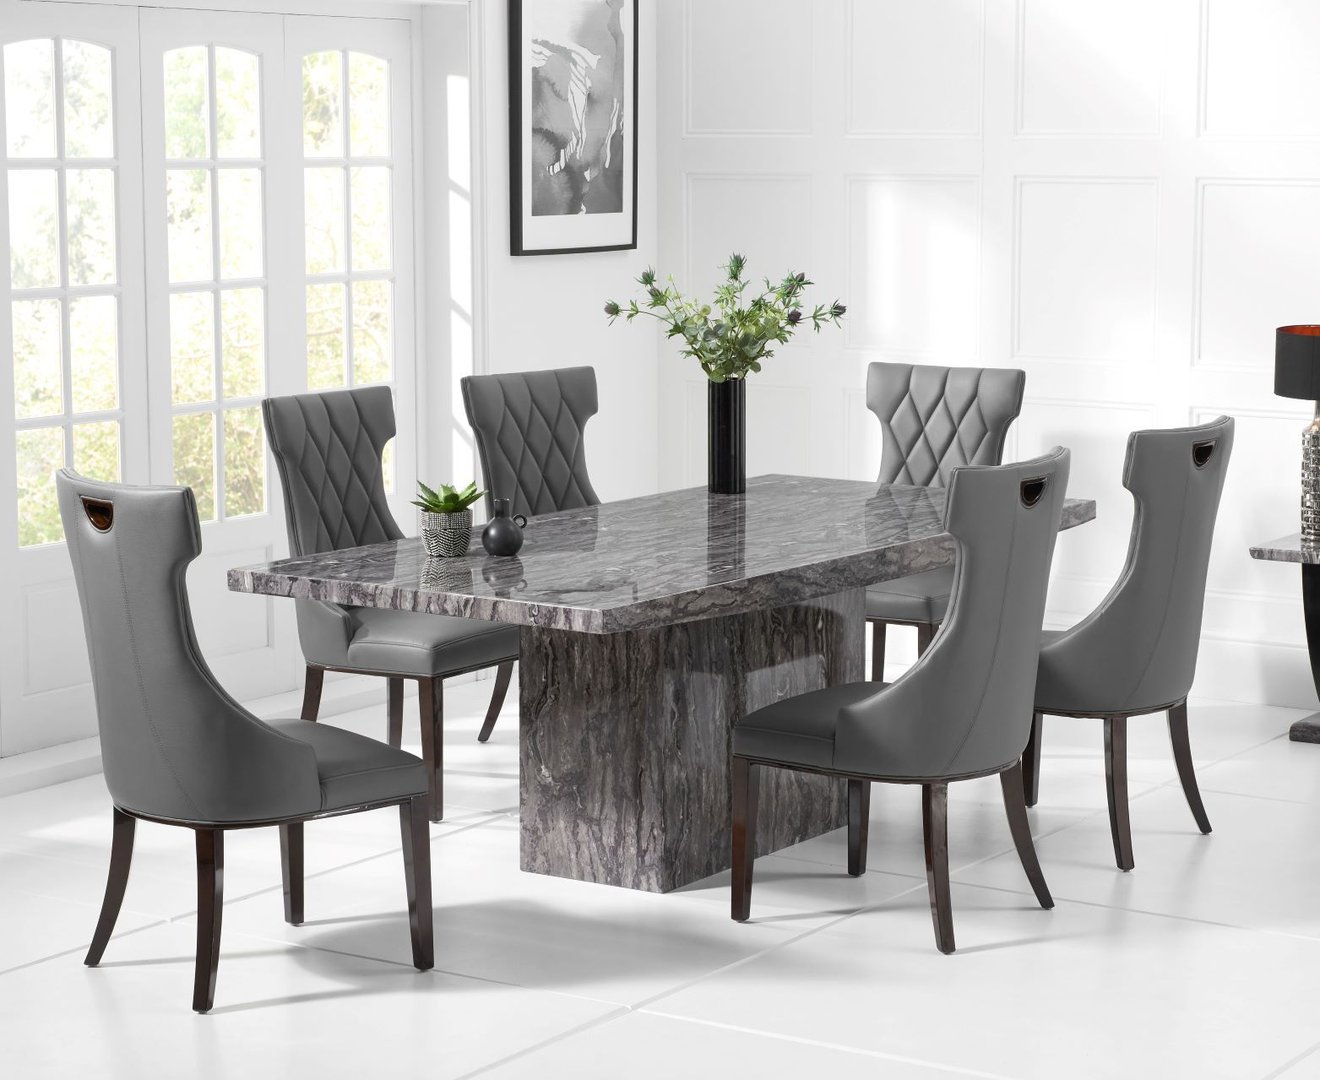 Modern grey marble dining table set with 6 chairs - Homegenies